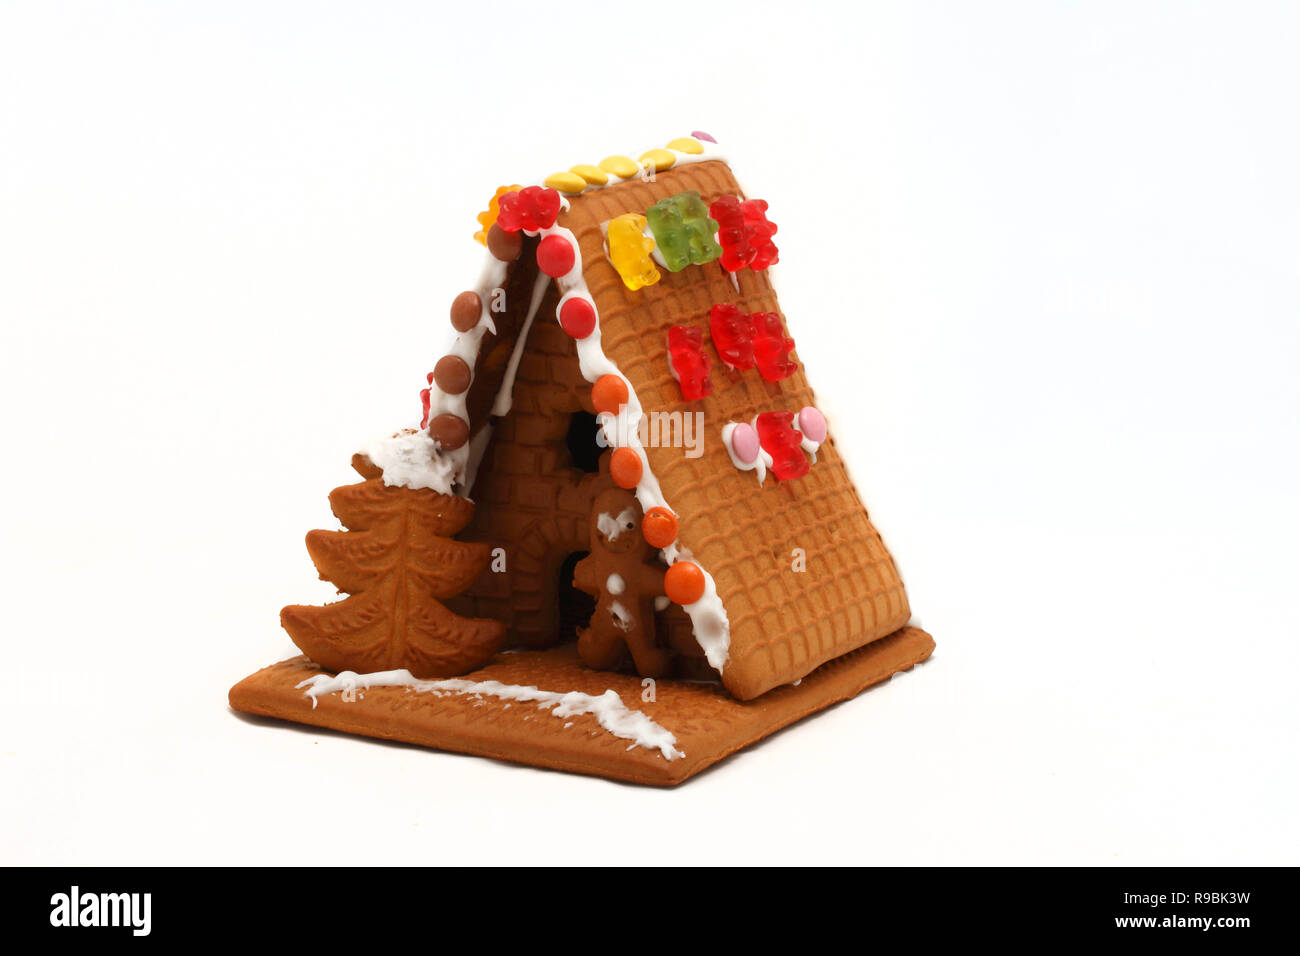 Name: Barry-John's Gingerbread House, child's gingerbread house Date ...